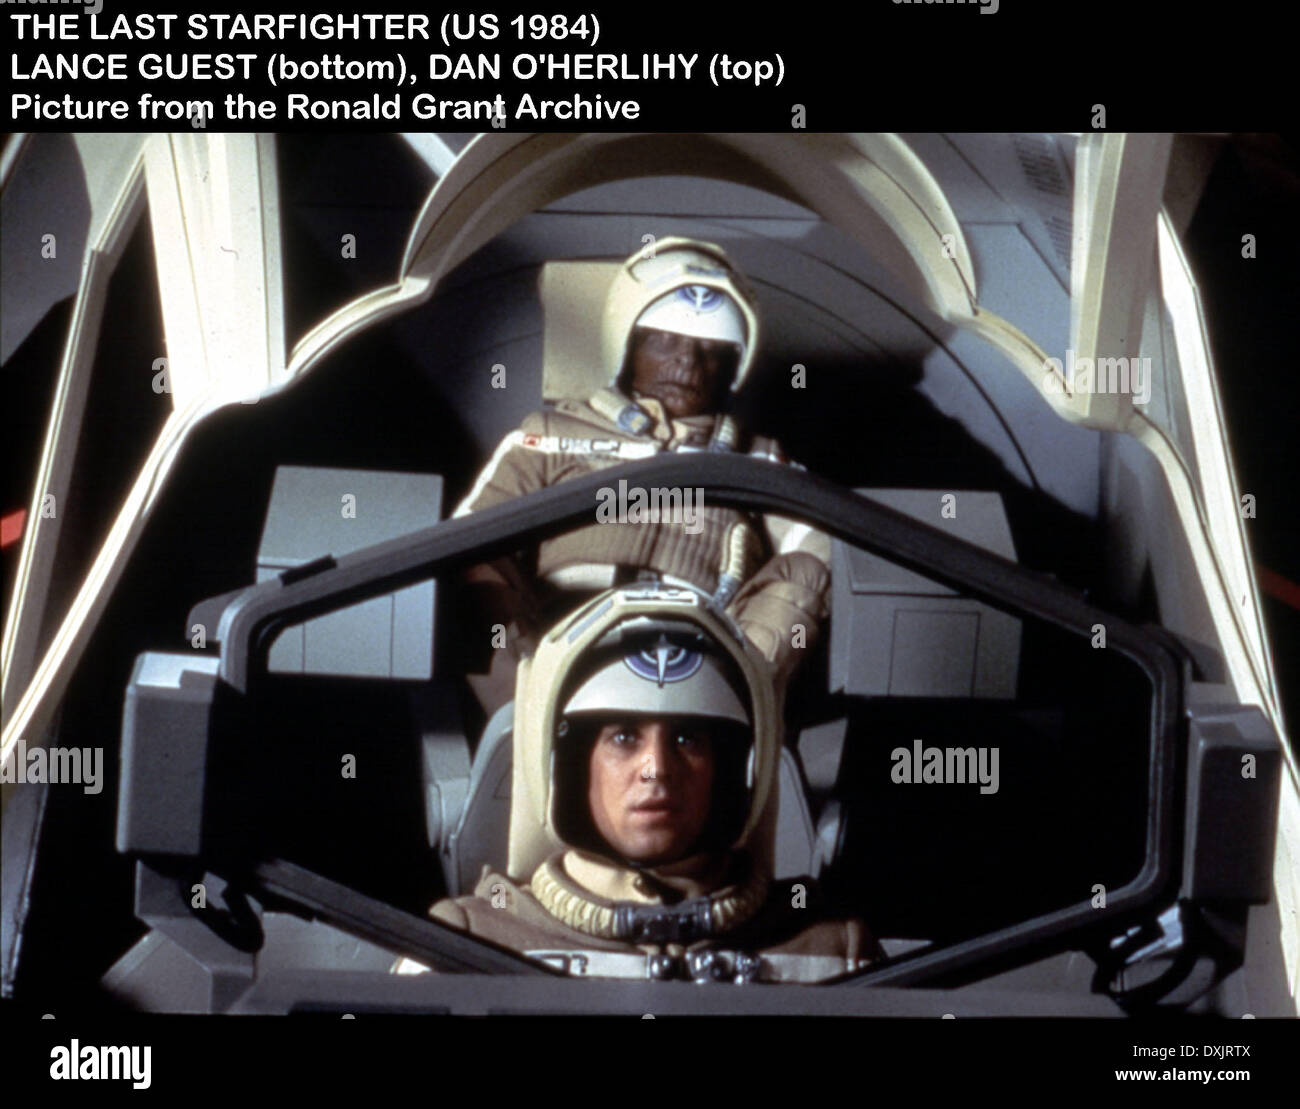 THE LAST STARFIGHTER Banque D'Images